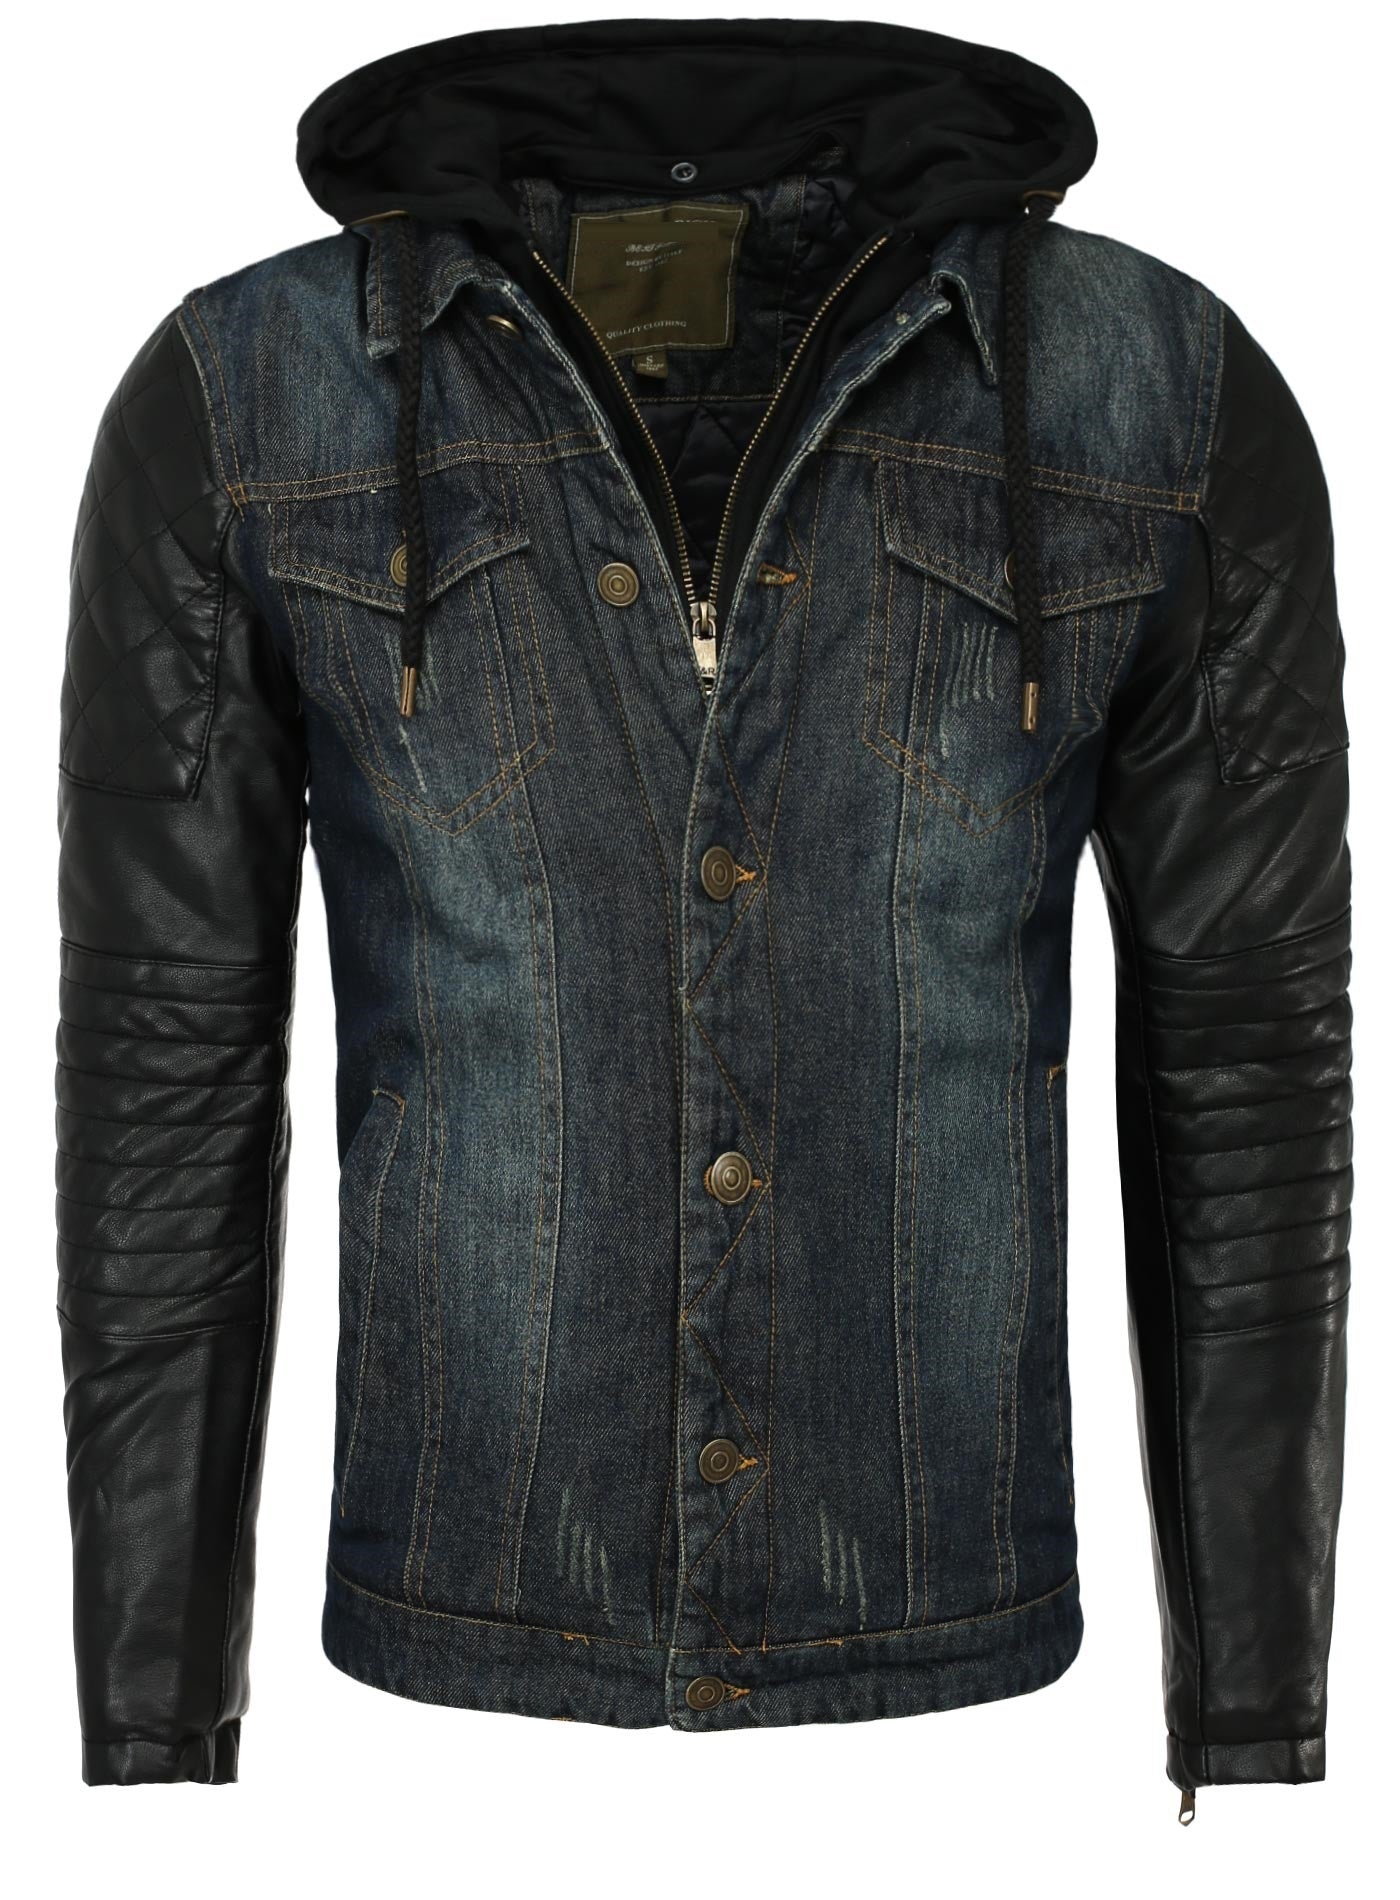 Stylish denim jacket for men, featuring a buttoned front, multiple pockets,  and a urban-style lapel collar. - BERN